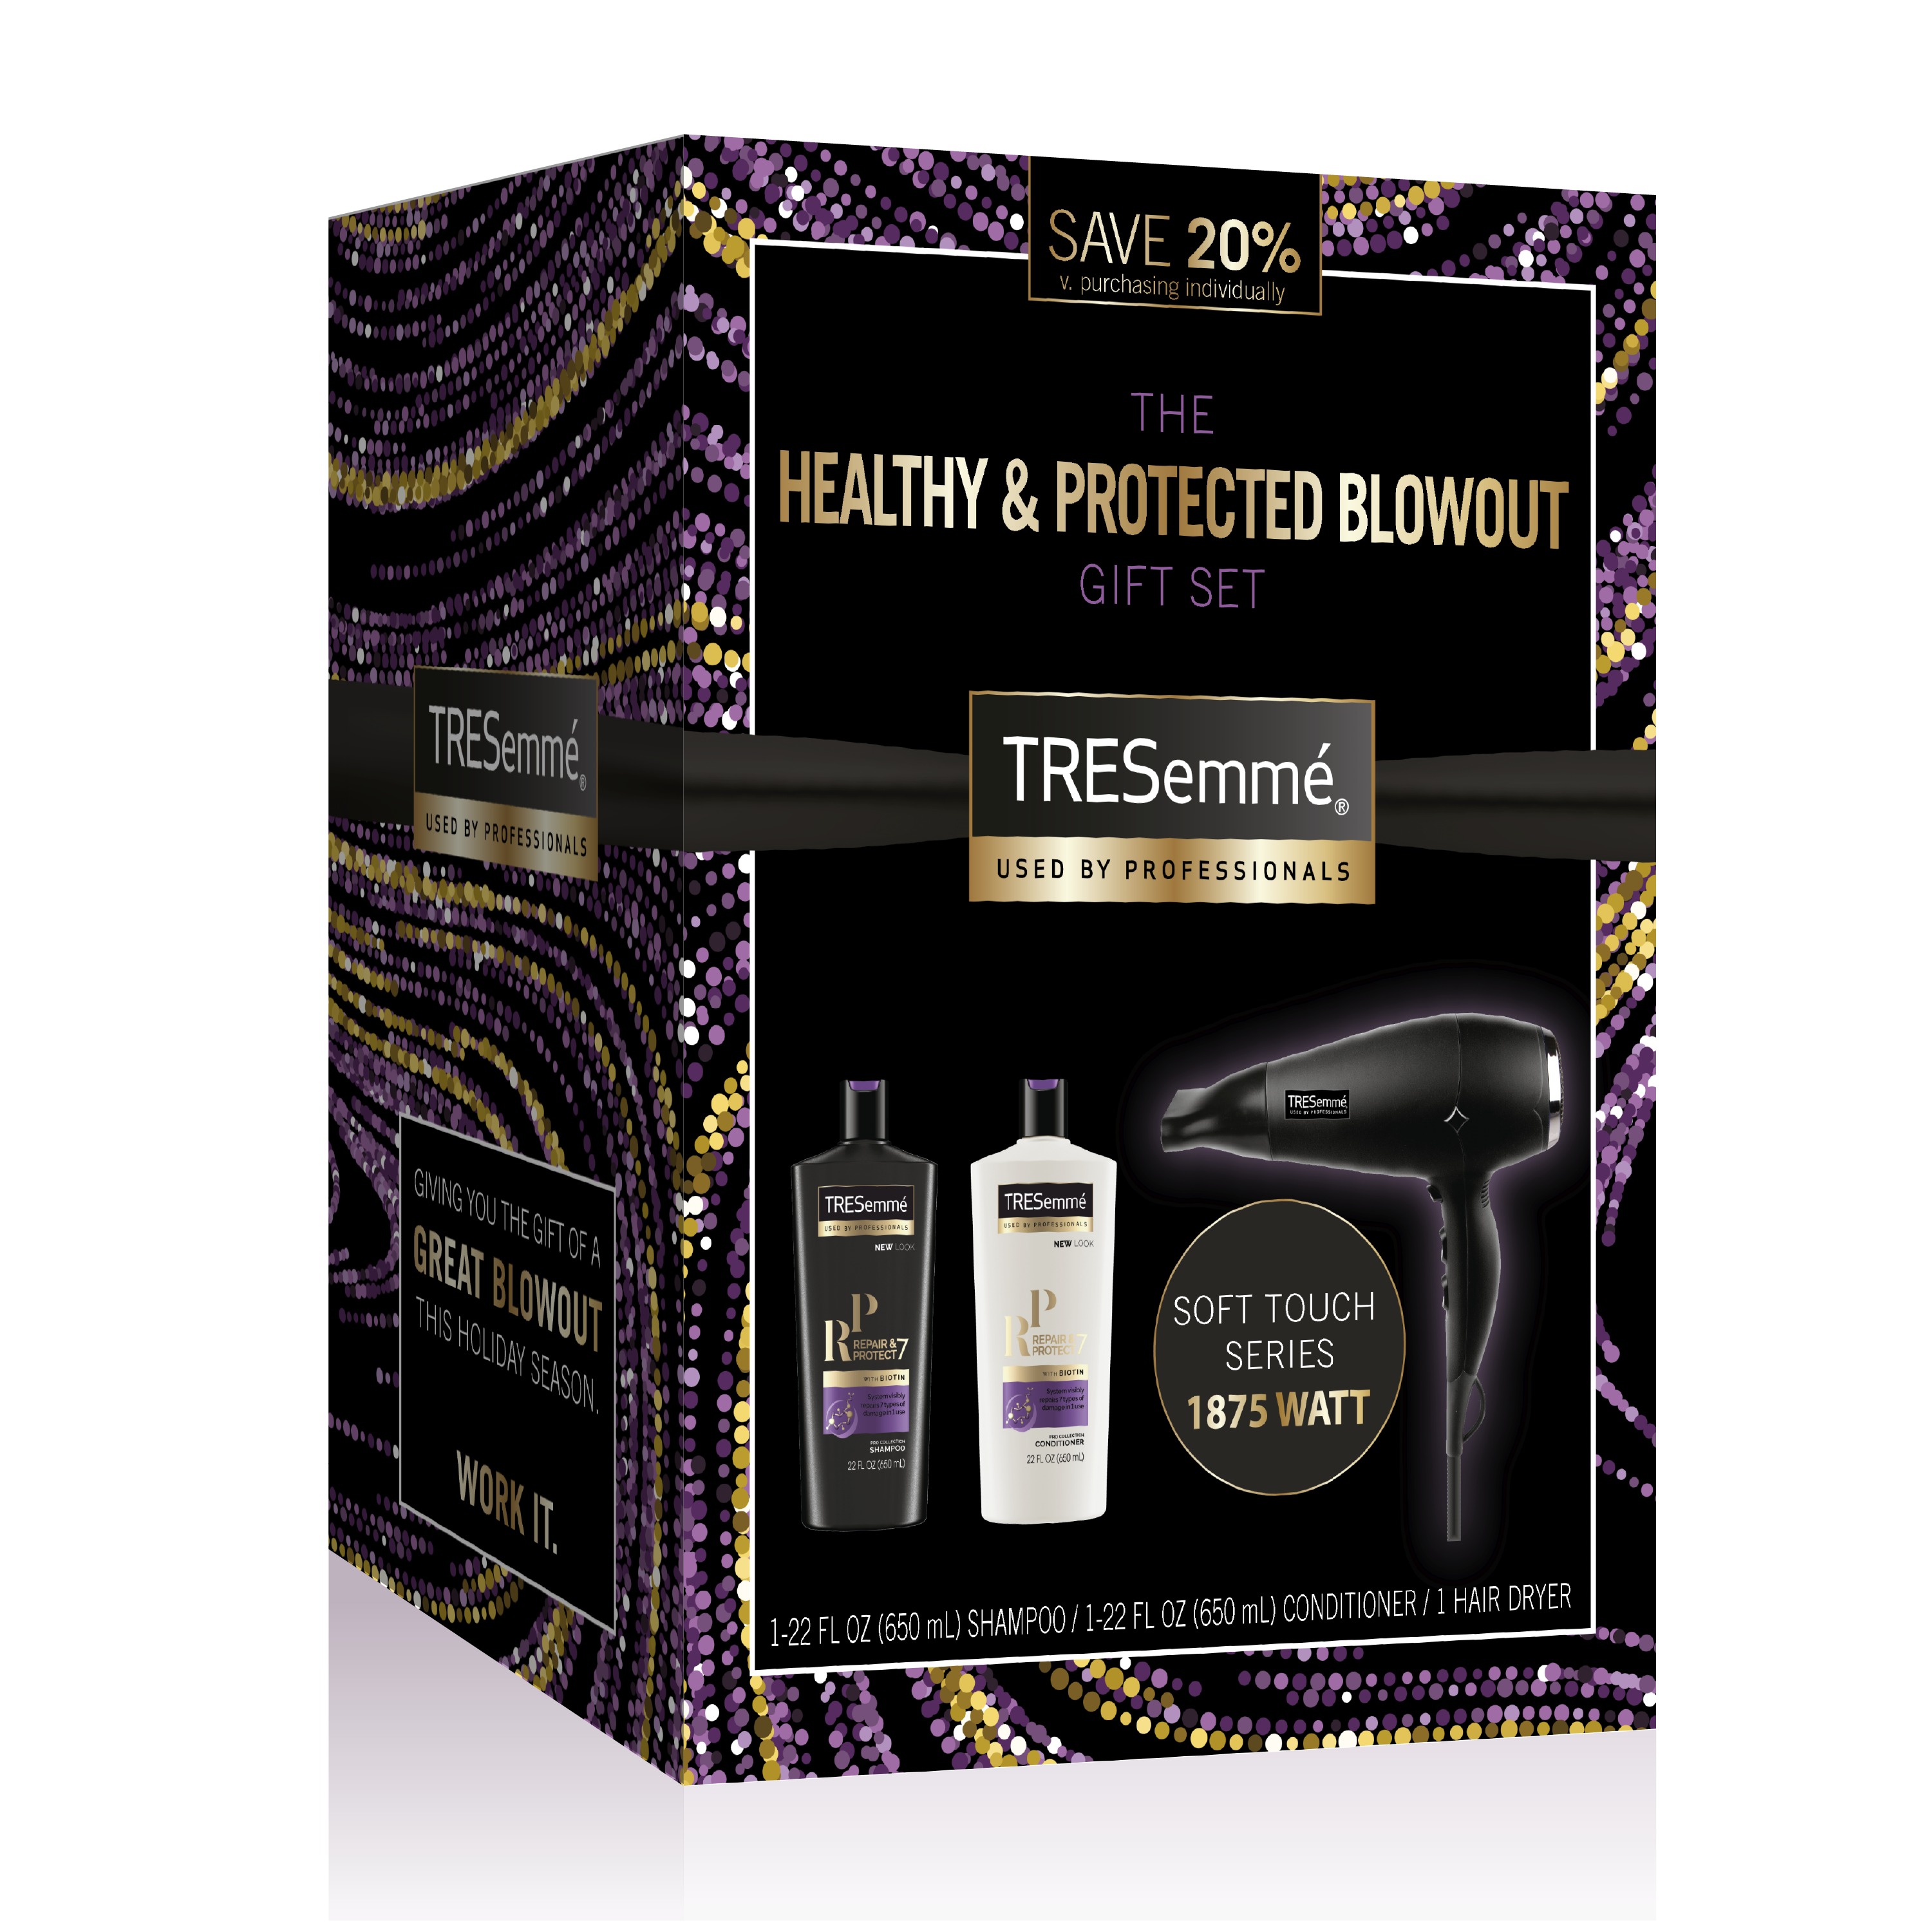 TRESemme 3-Pc Healthy & Protected Blowout Gift Set Repair and Protect with Hair Dryer (Shampoo, Conditioner) ($24.84 Value) - image 4 of 11